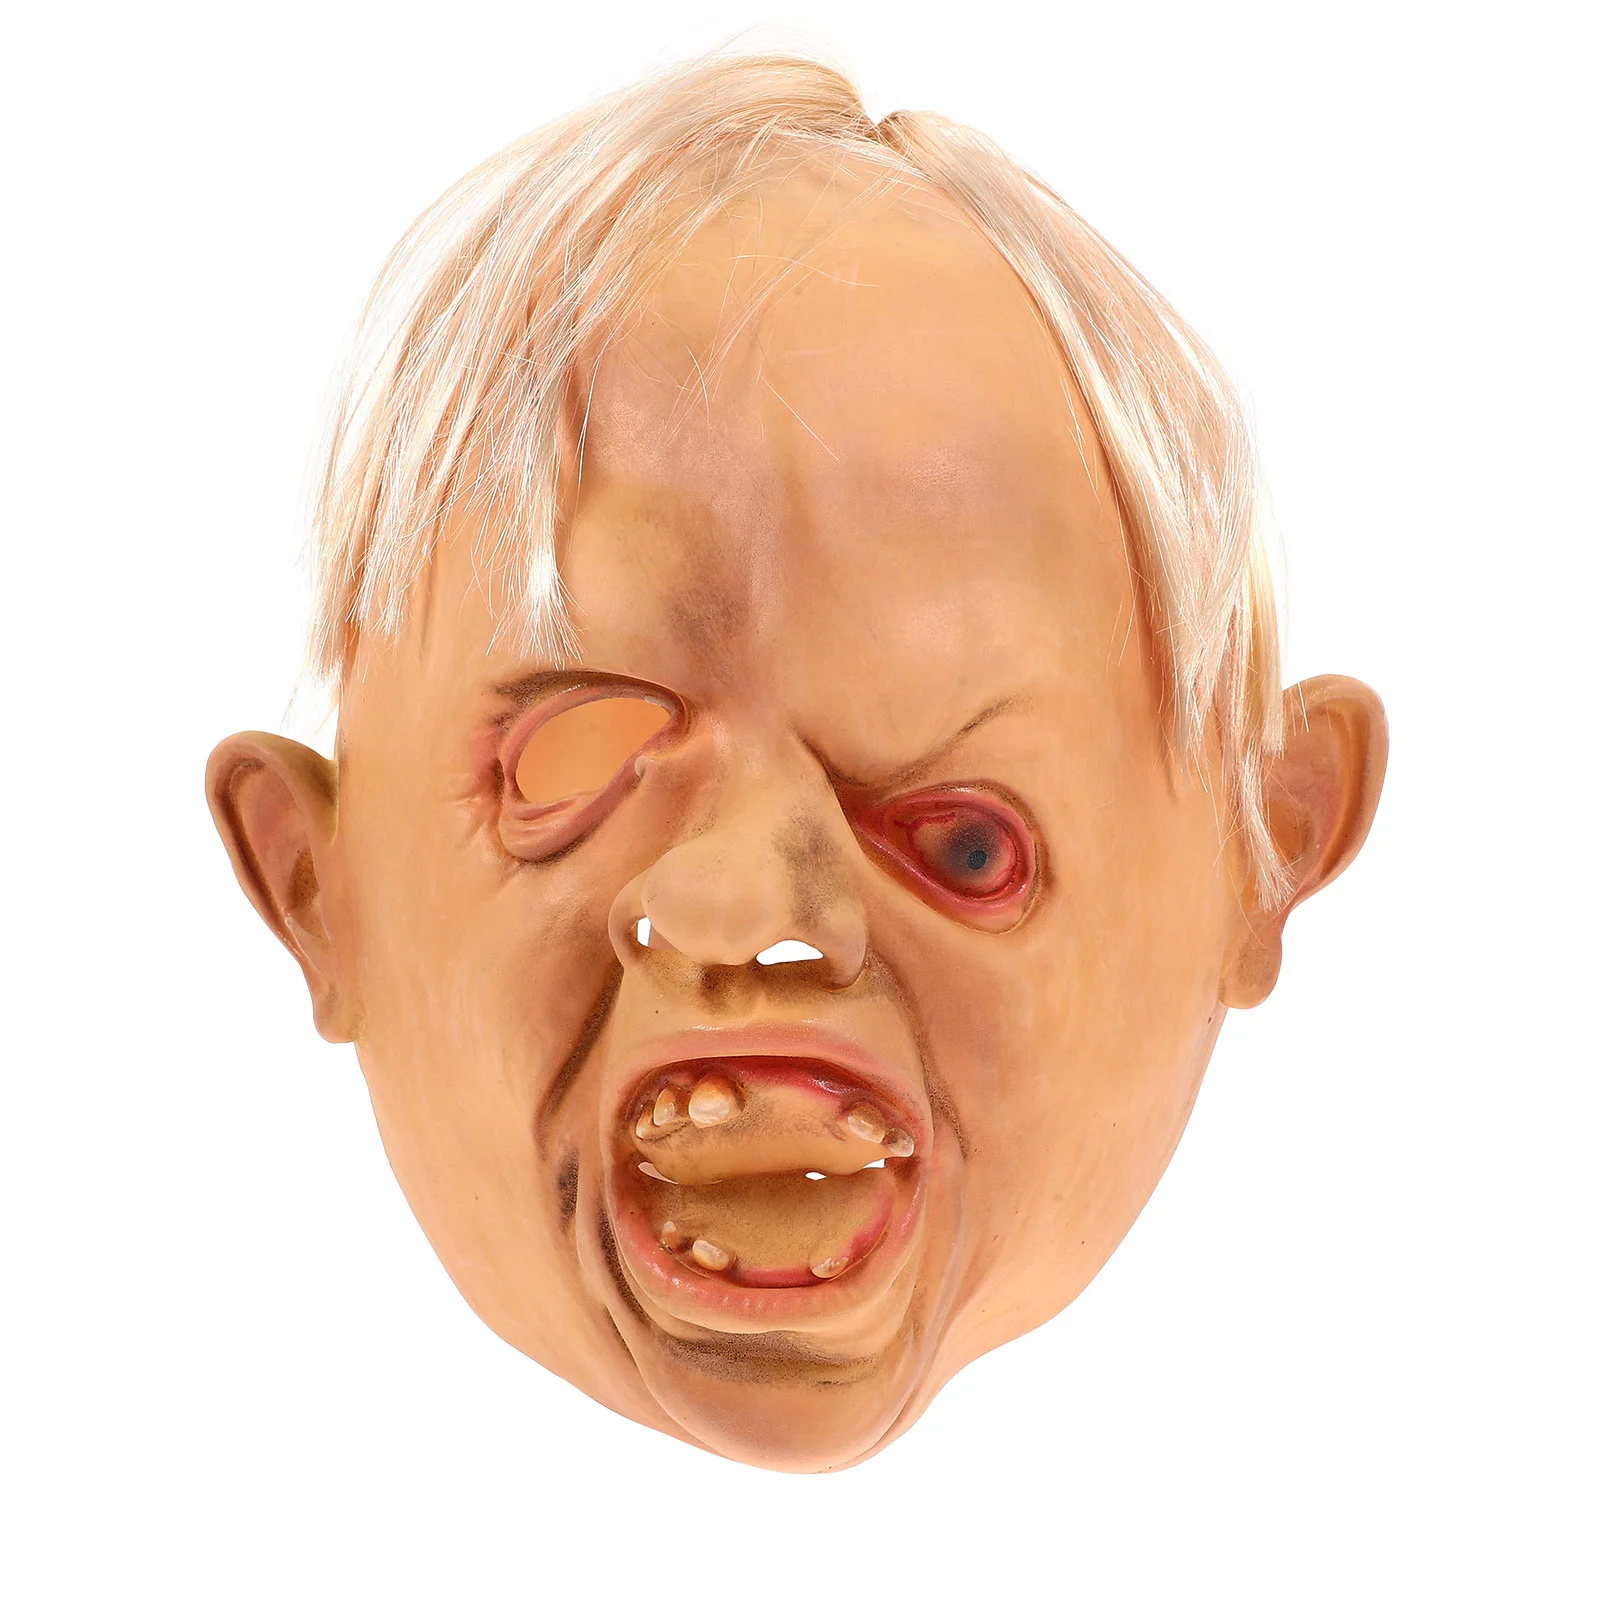 

Halloween Cosplay Horror Oblique Eye Man Funny Simulation Carnival Mask Scary Face Cover Costume Prop For Masquerade Make-up